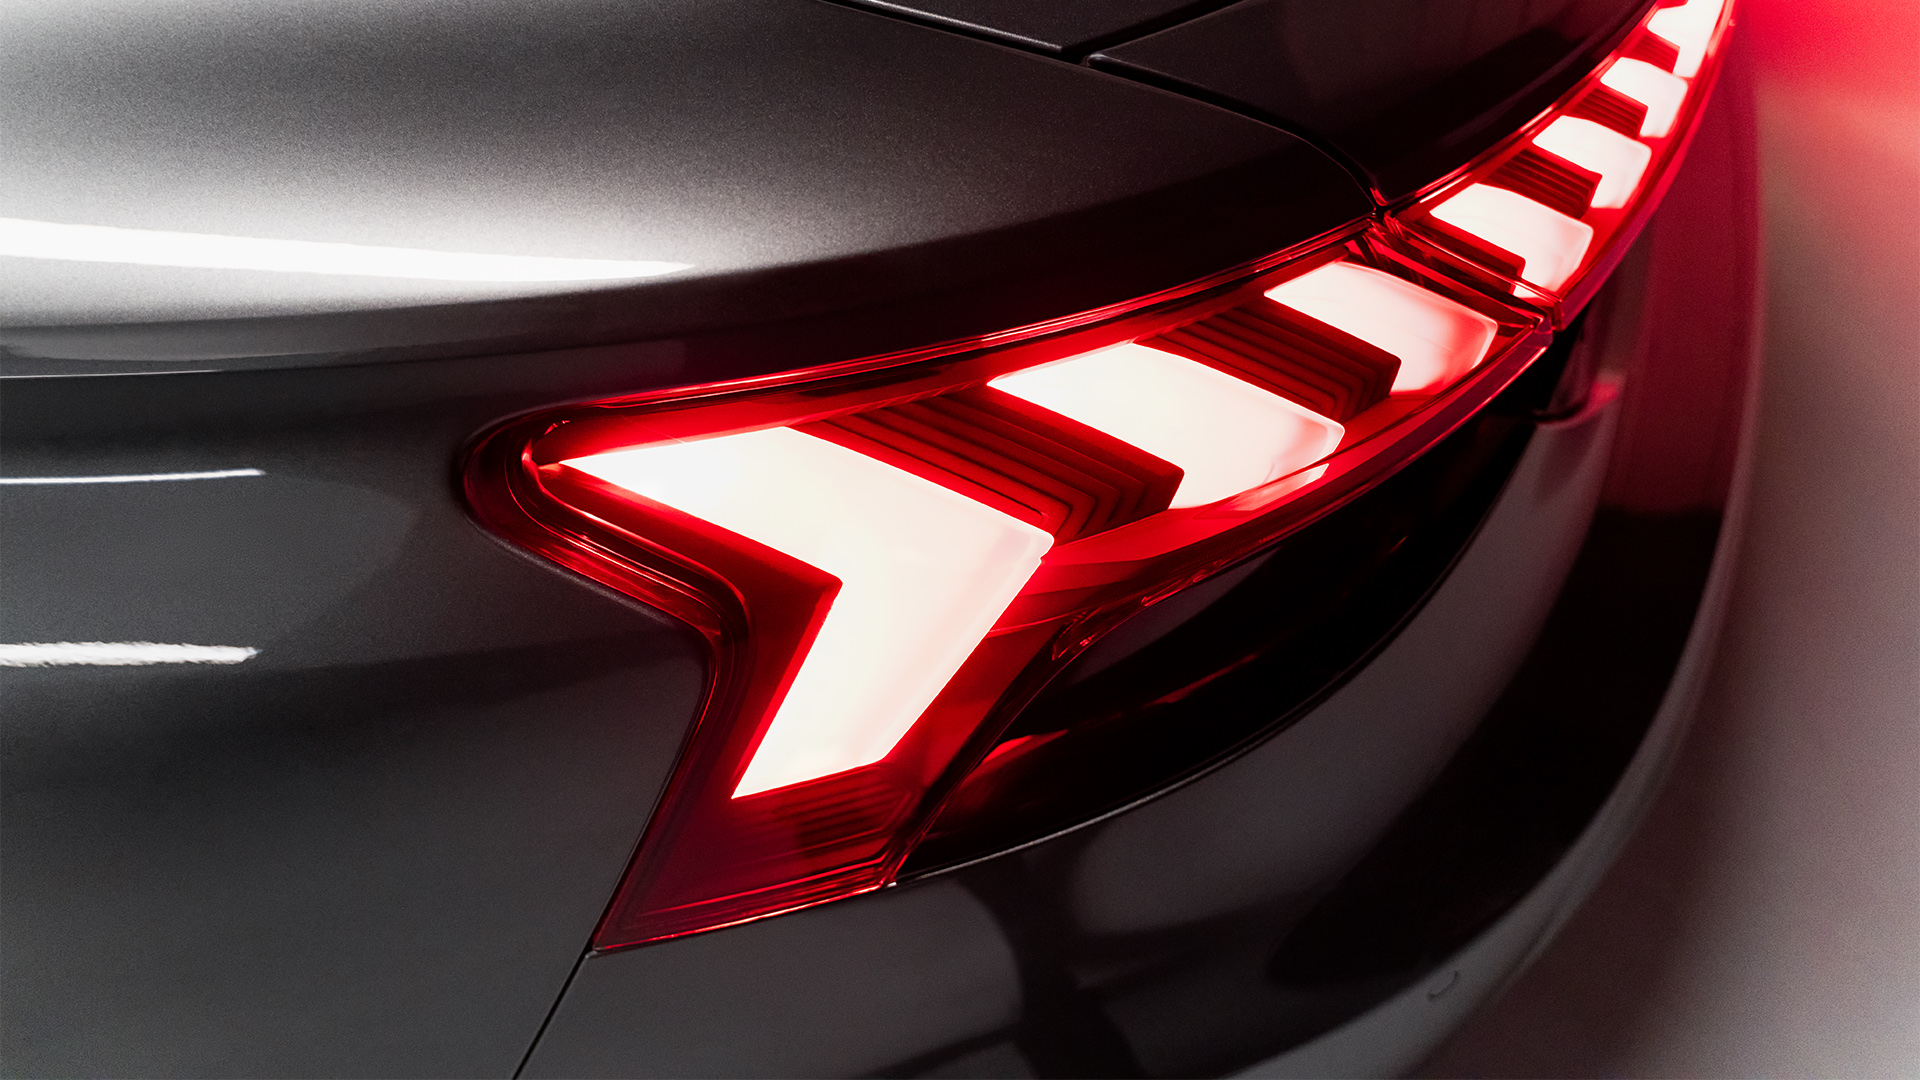 The taillights on the Audi RS e-tron GT 